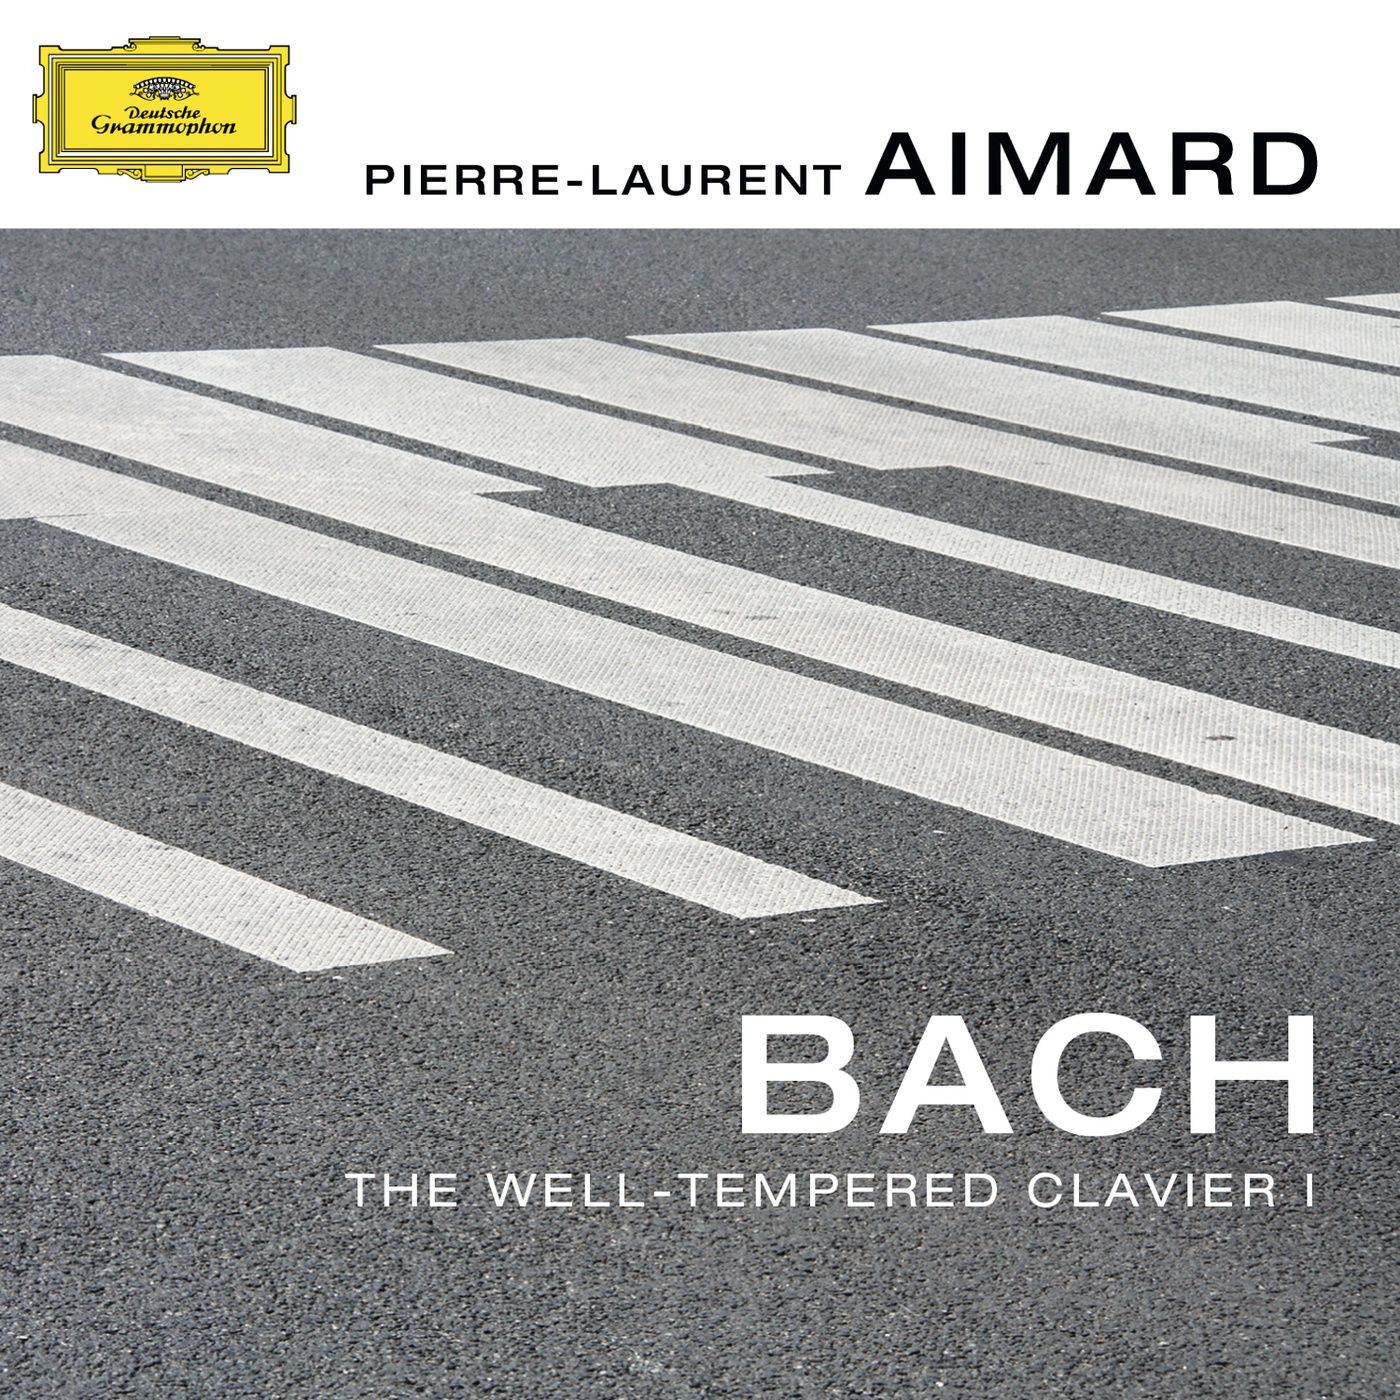 J.S. Bach: Prelude & Fugue In C Major (Well-Tempered Clavier, Book I, No.1), BWV 846 - 1. Prelude